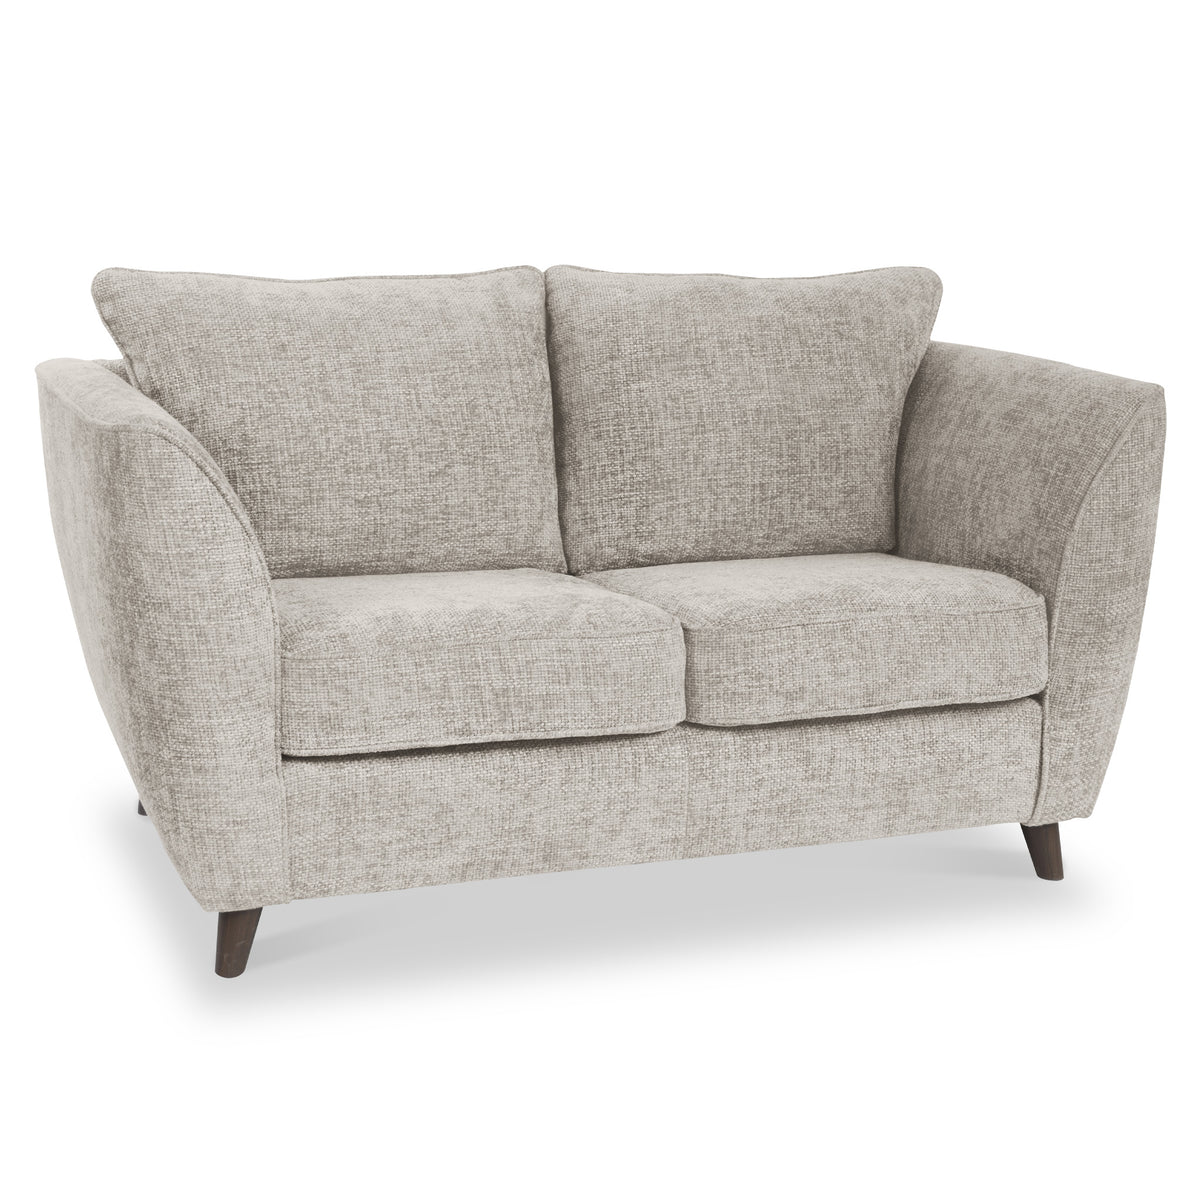 Tamsin Stone 2 Seater Sofa from Roseland Furniture